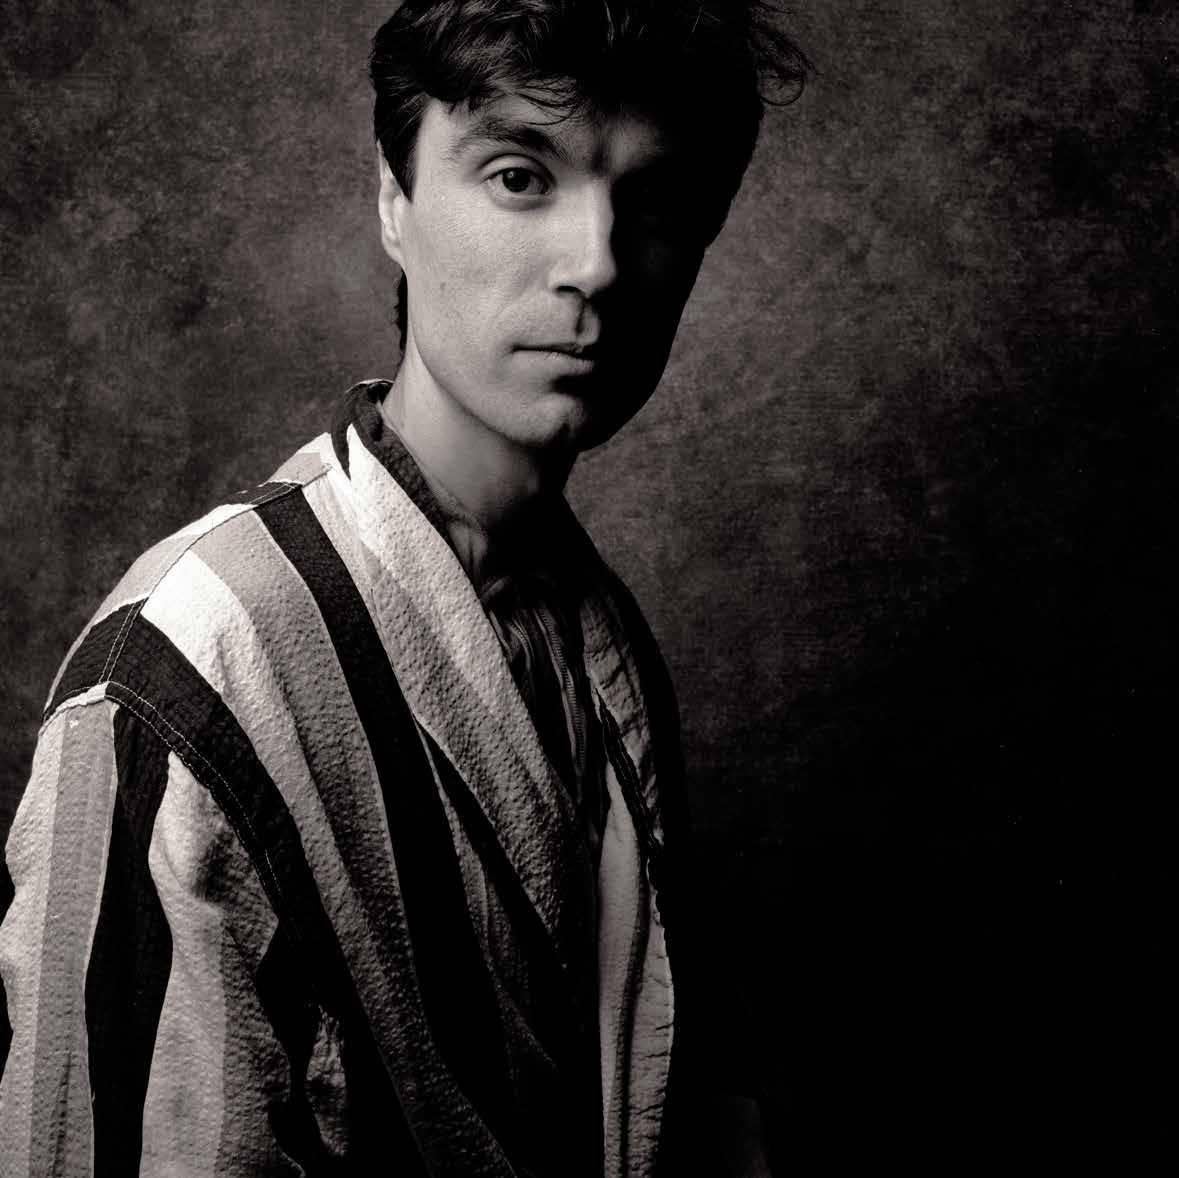 David Byrne (Talking Heads) - Photograph by William Coupon